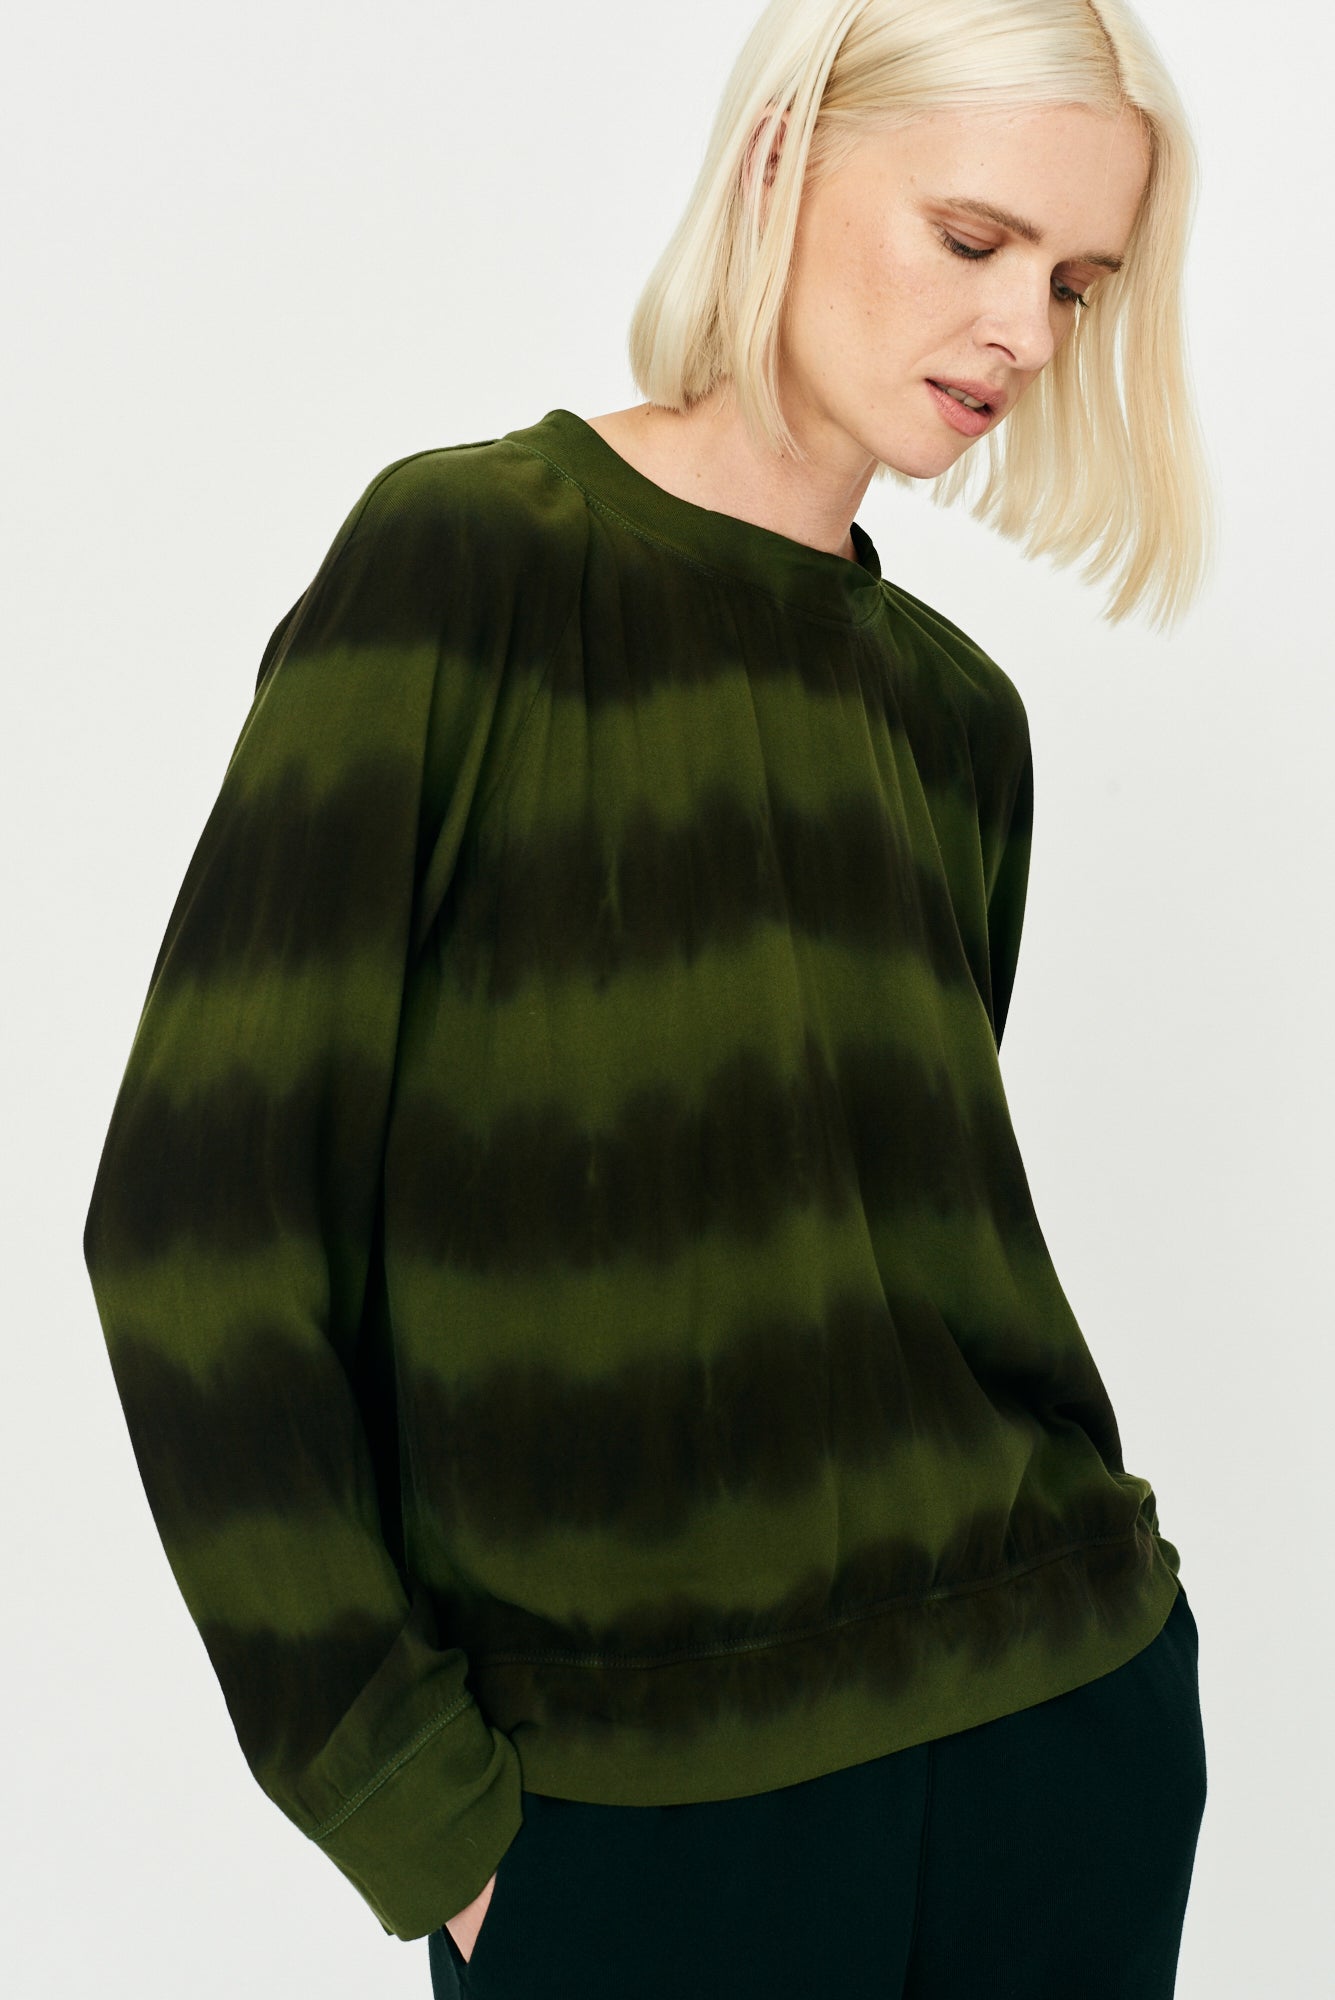 Forest Black and Stripes Tie Dye Ghost Ranch Soft Twill Raglan Sweatshirt Front Close-Up View